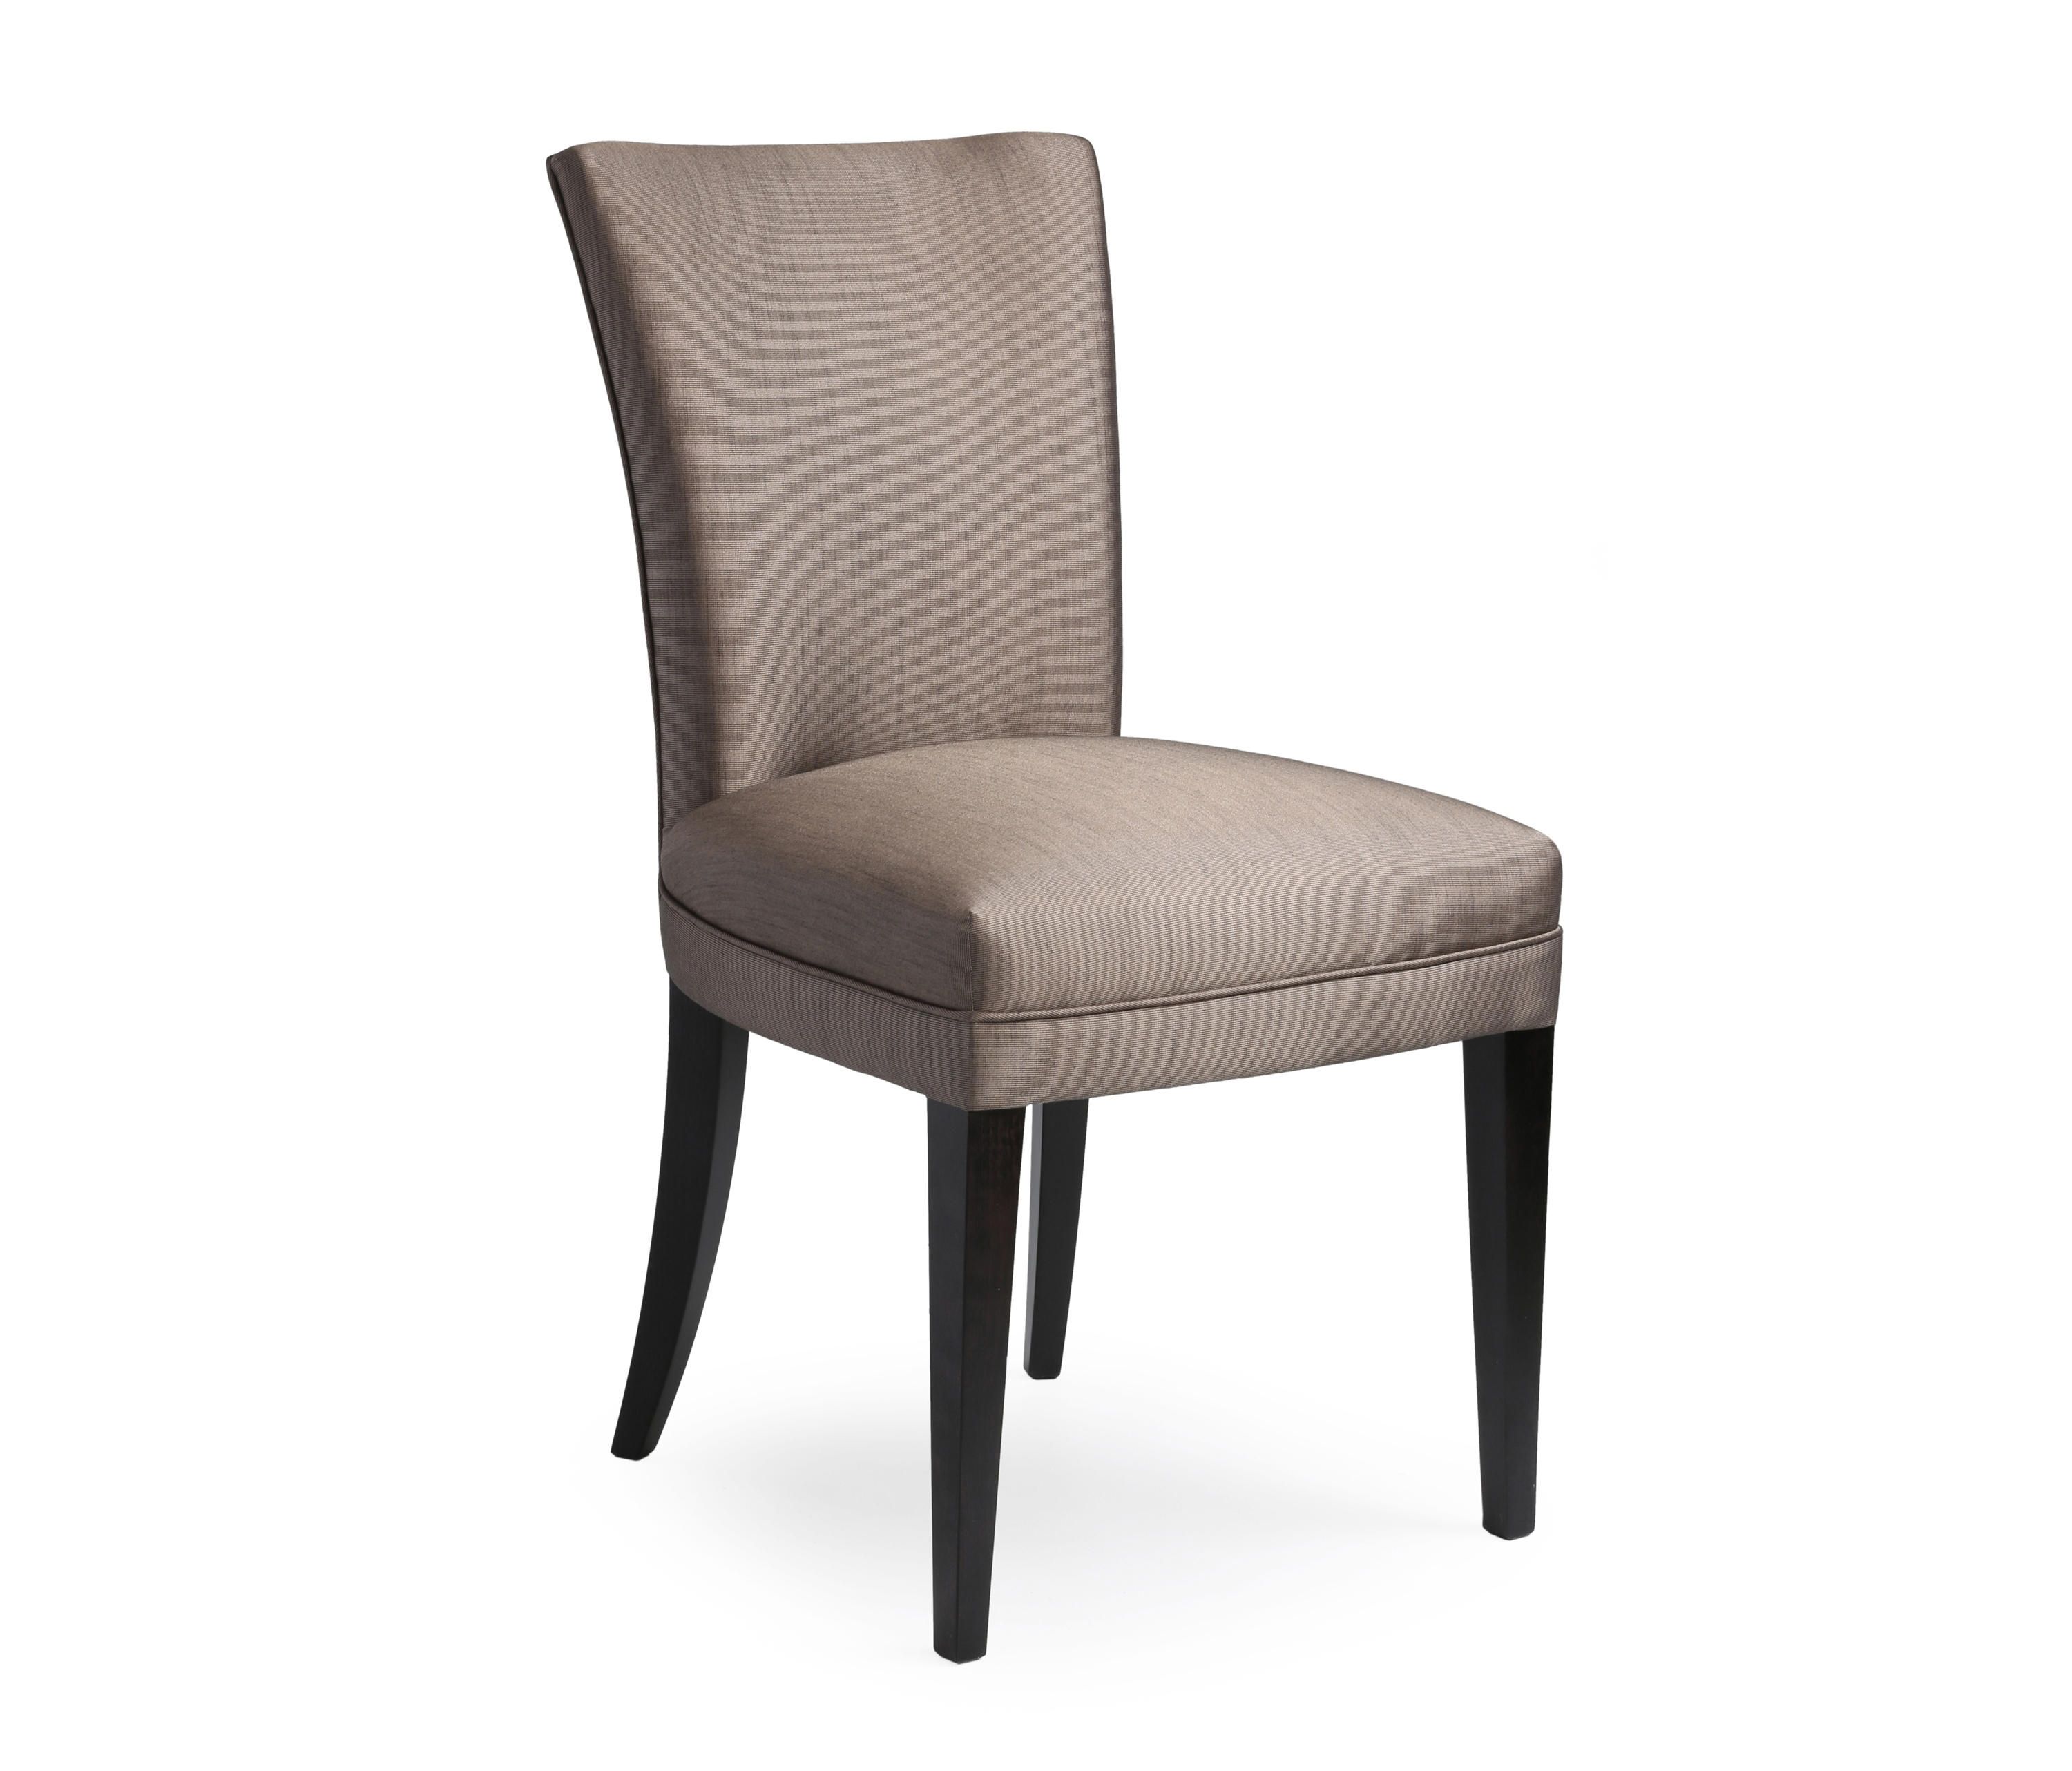 Dining Sofa Chairs With Favorite Paris Dining Chair – Restaurant Chairs From The Sofa & Chair (Photo 1 of 15)